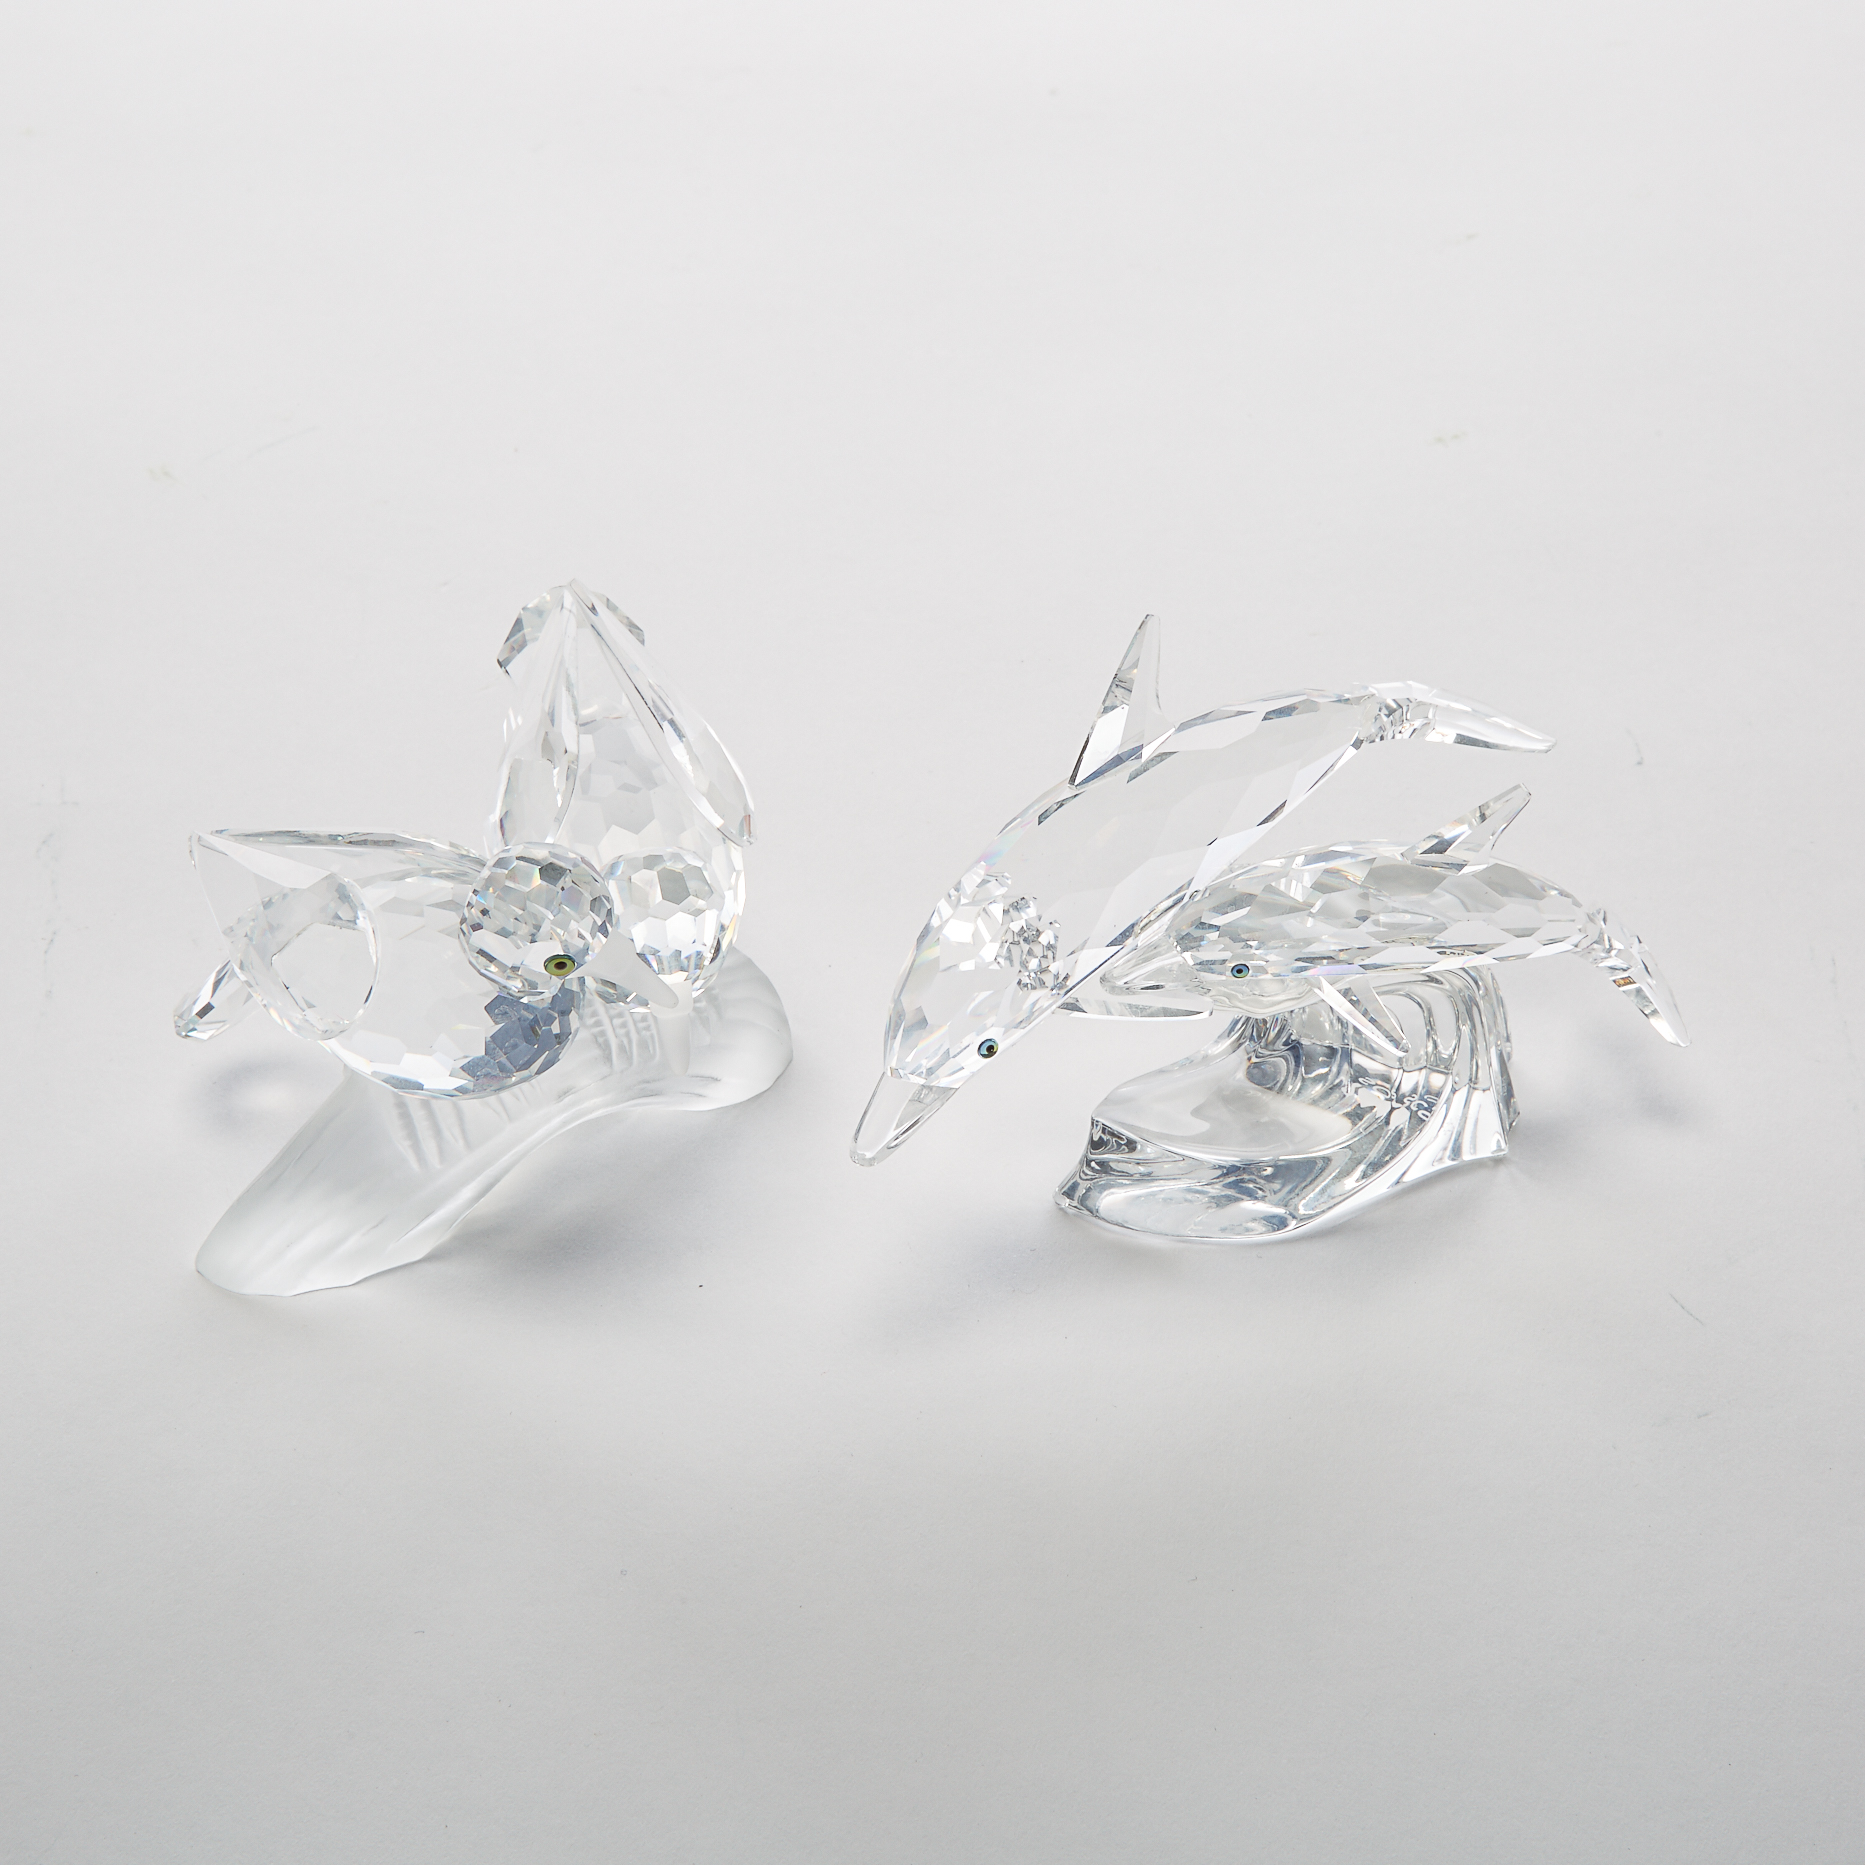 Swarovski Crystal 'Caring and Sharing' Turtledoves and 'Lead Me' Dolphins, 1989/1990